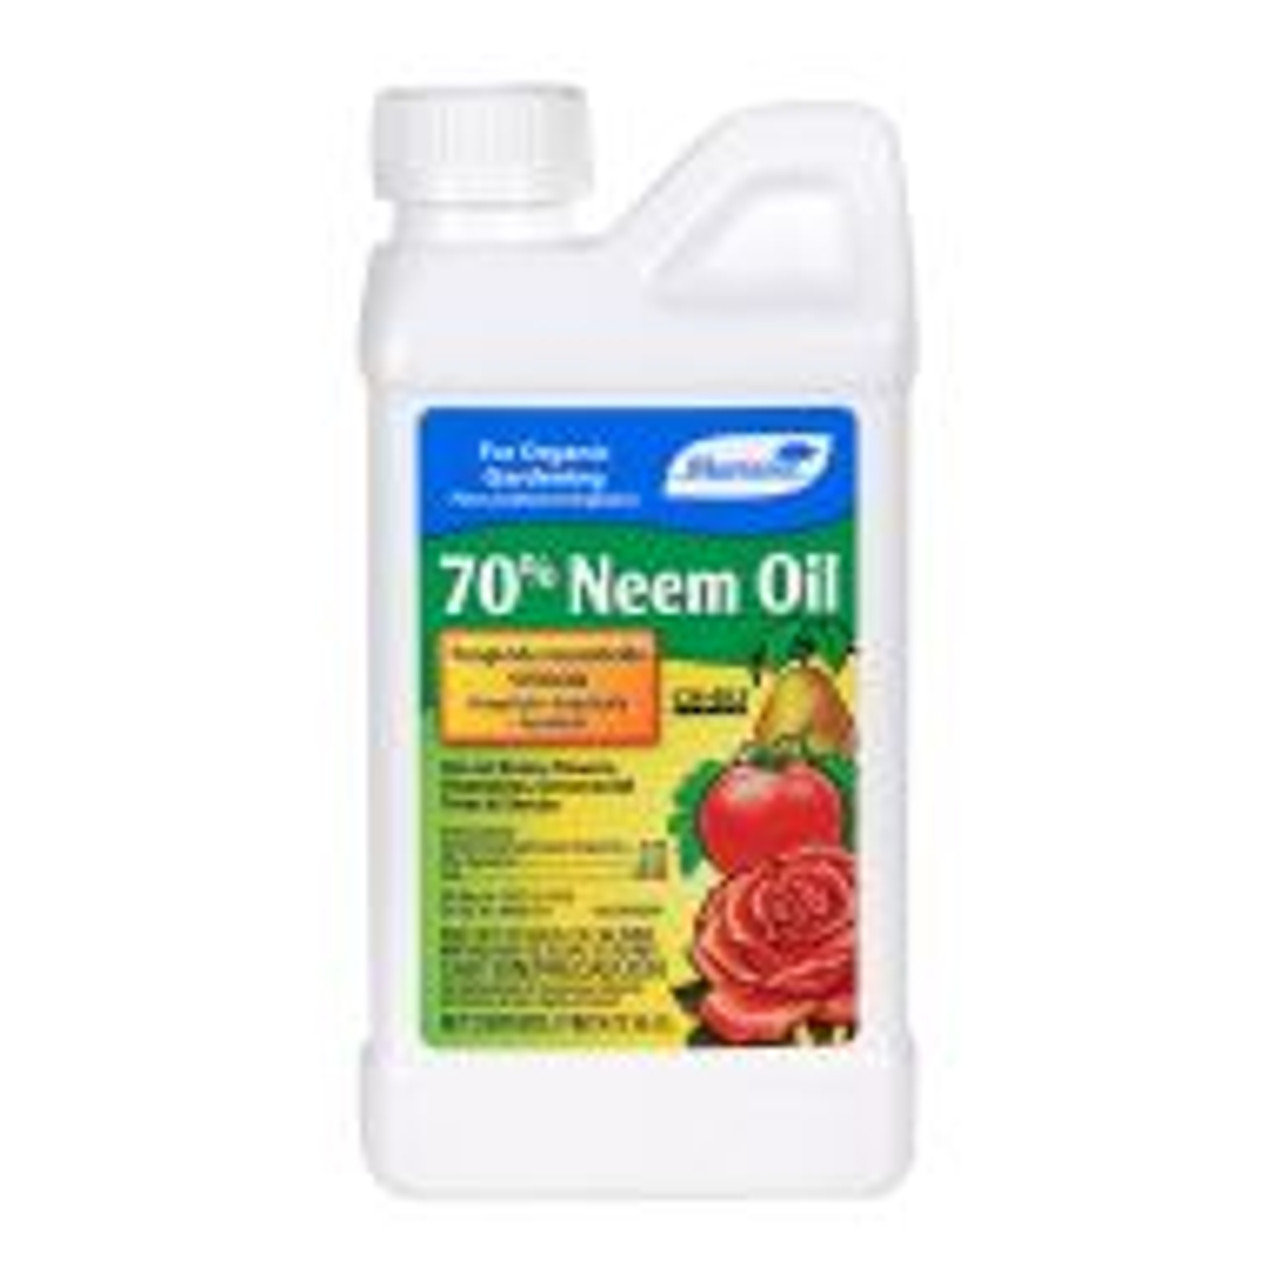 Neem Oil controls black spot, rust and mildew, and kills mites and insects including whitefly, aphid and scale. Safe for use indoor or out on ornamental plants, flowers, vegetables, trees, shrubs as well as fruit and nut crops.